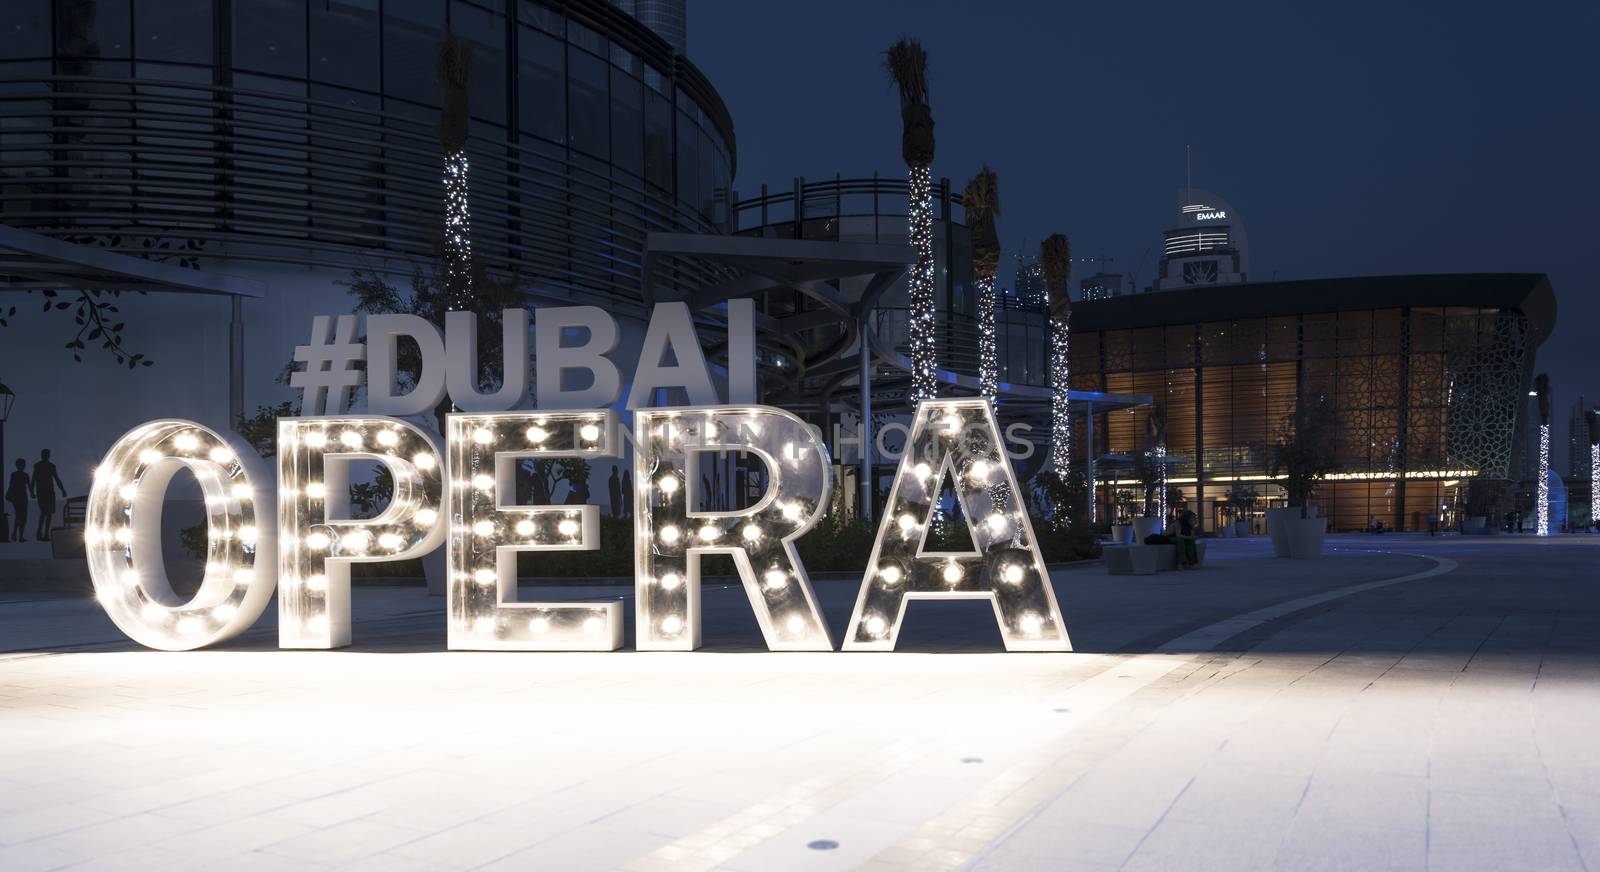 Located in Downtown Dubai, Dubai Opera is the new centre of culture and arts in Dubai. (with 2000-seat multi-format theatre). The iconic dhow-shaped architecture of Dubai Opera is a masterpiece of contemporary design, and a stylish tribute to Dubai’s trading, fishing, and pearl diving heritage. Open in 2106